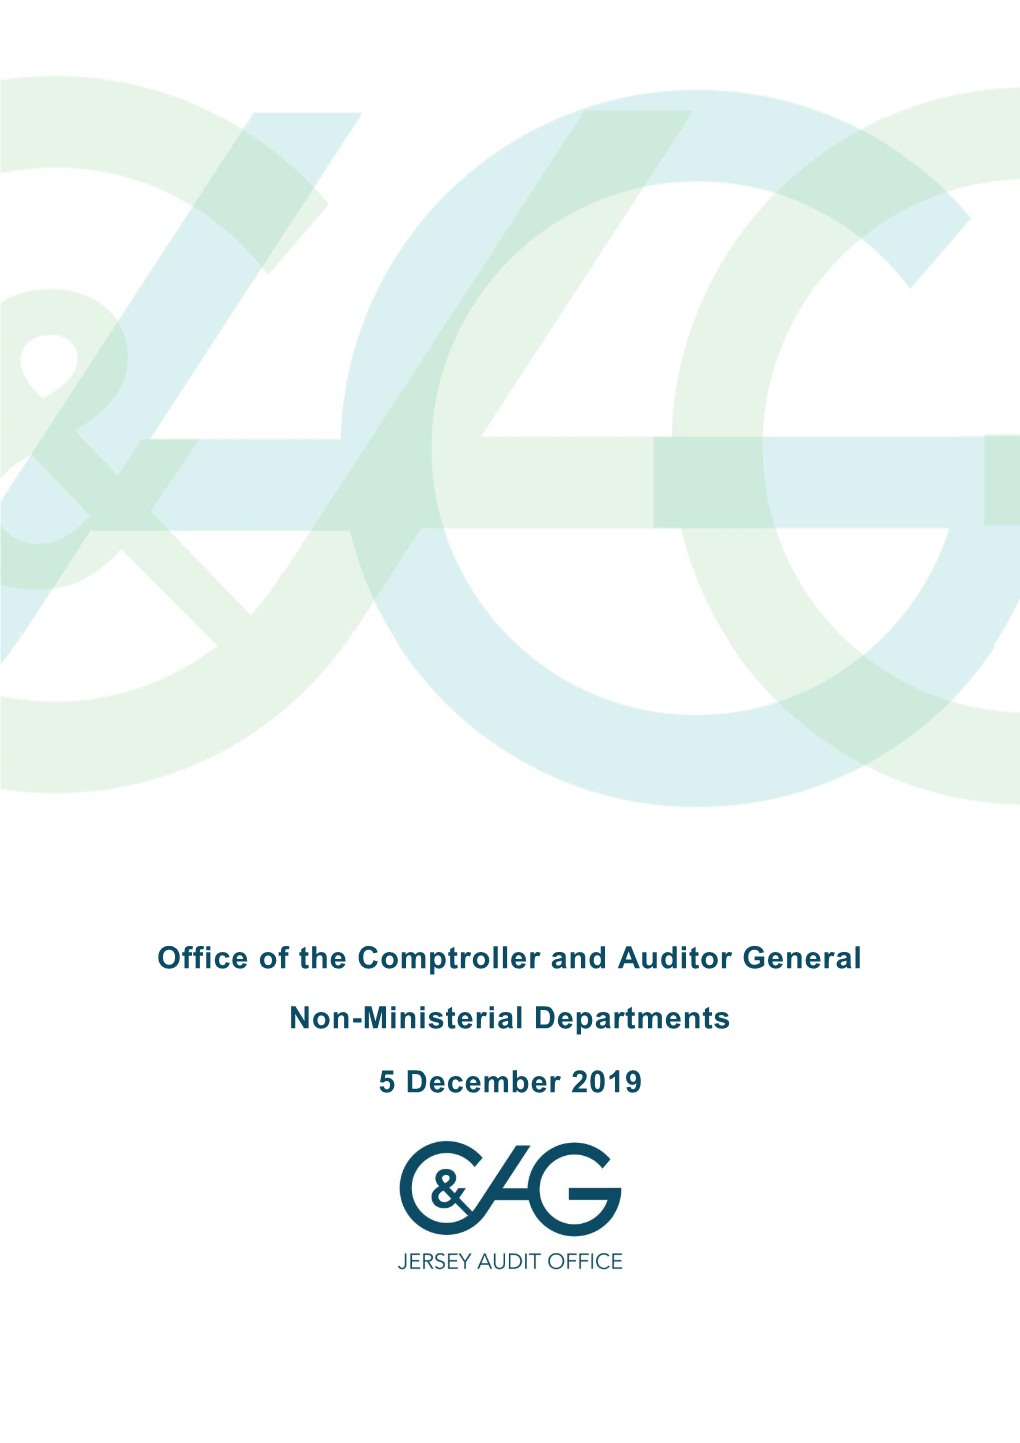 Office of the Comptroller and Auditor General Non-Ministerial Departments 5 December 2019